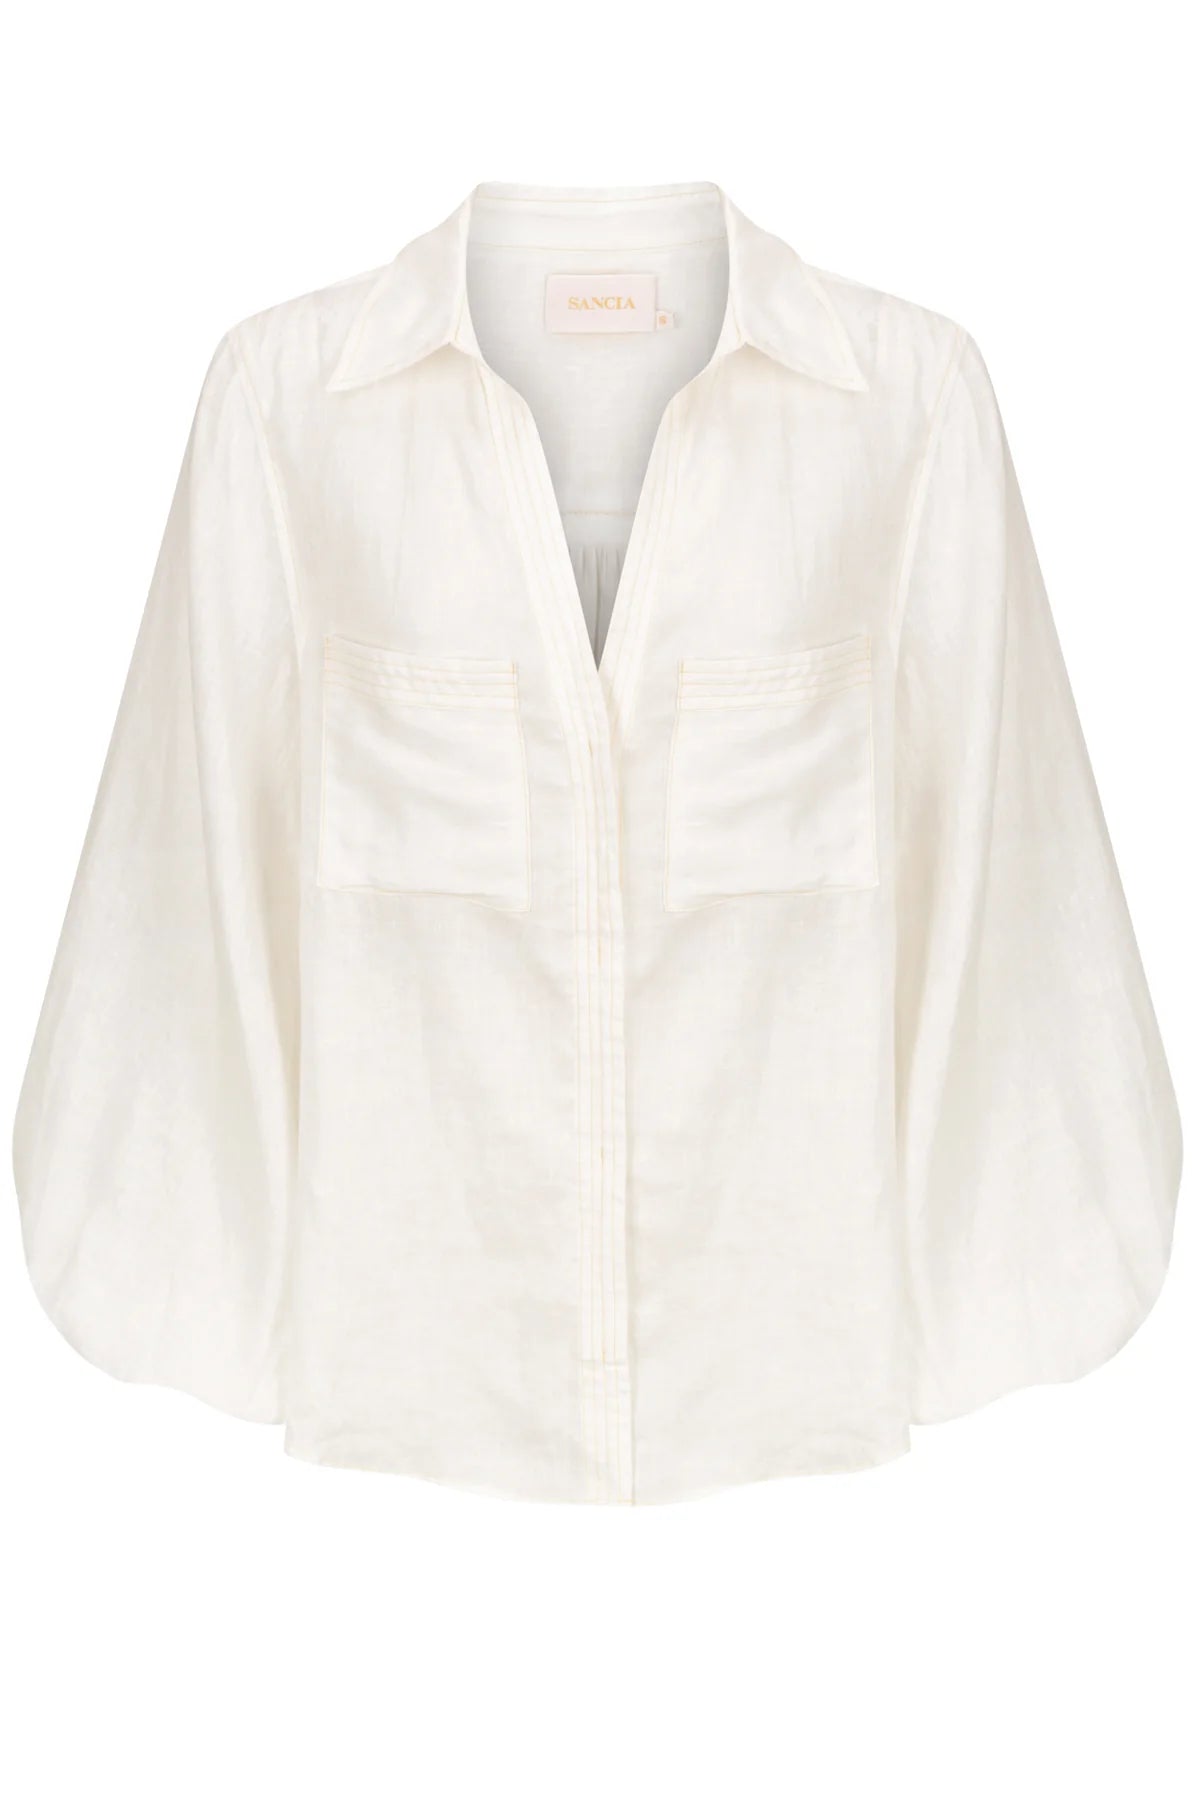 White linen shirt with balloon sleeves